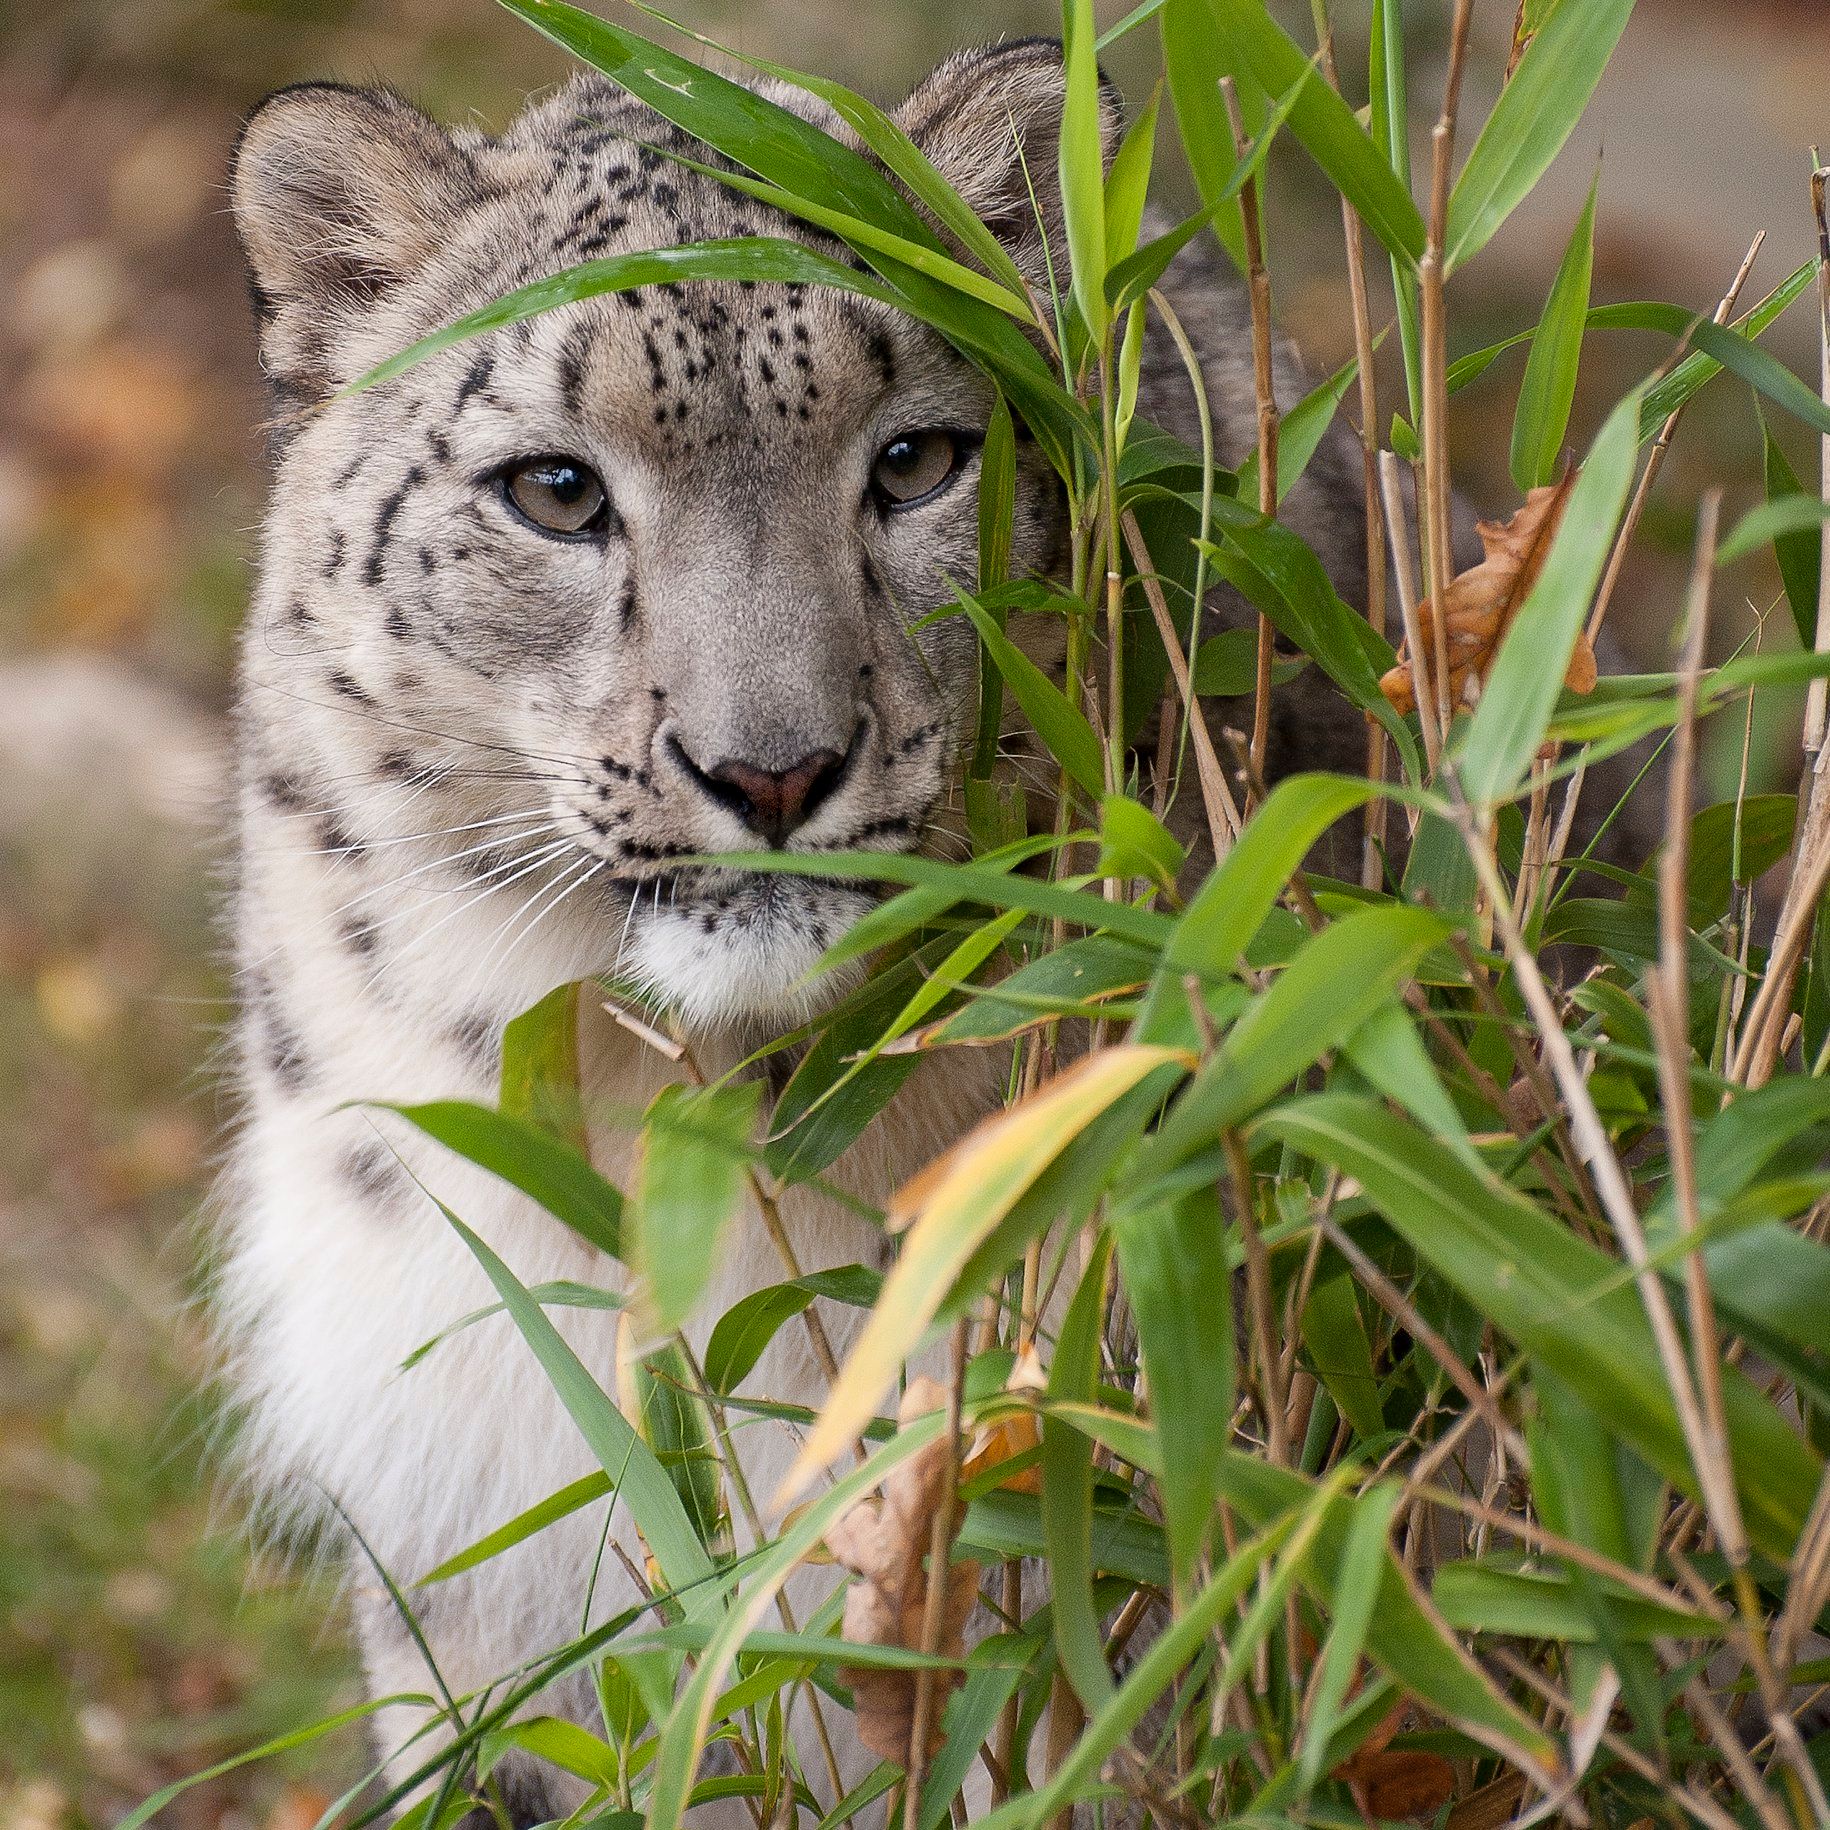 Snow Leopard Magic Moment (16+) – Royal Zoological Society of Scotland